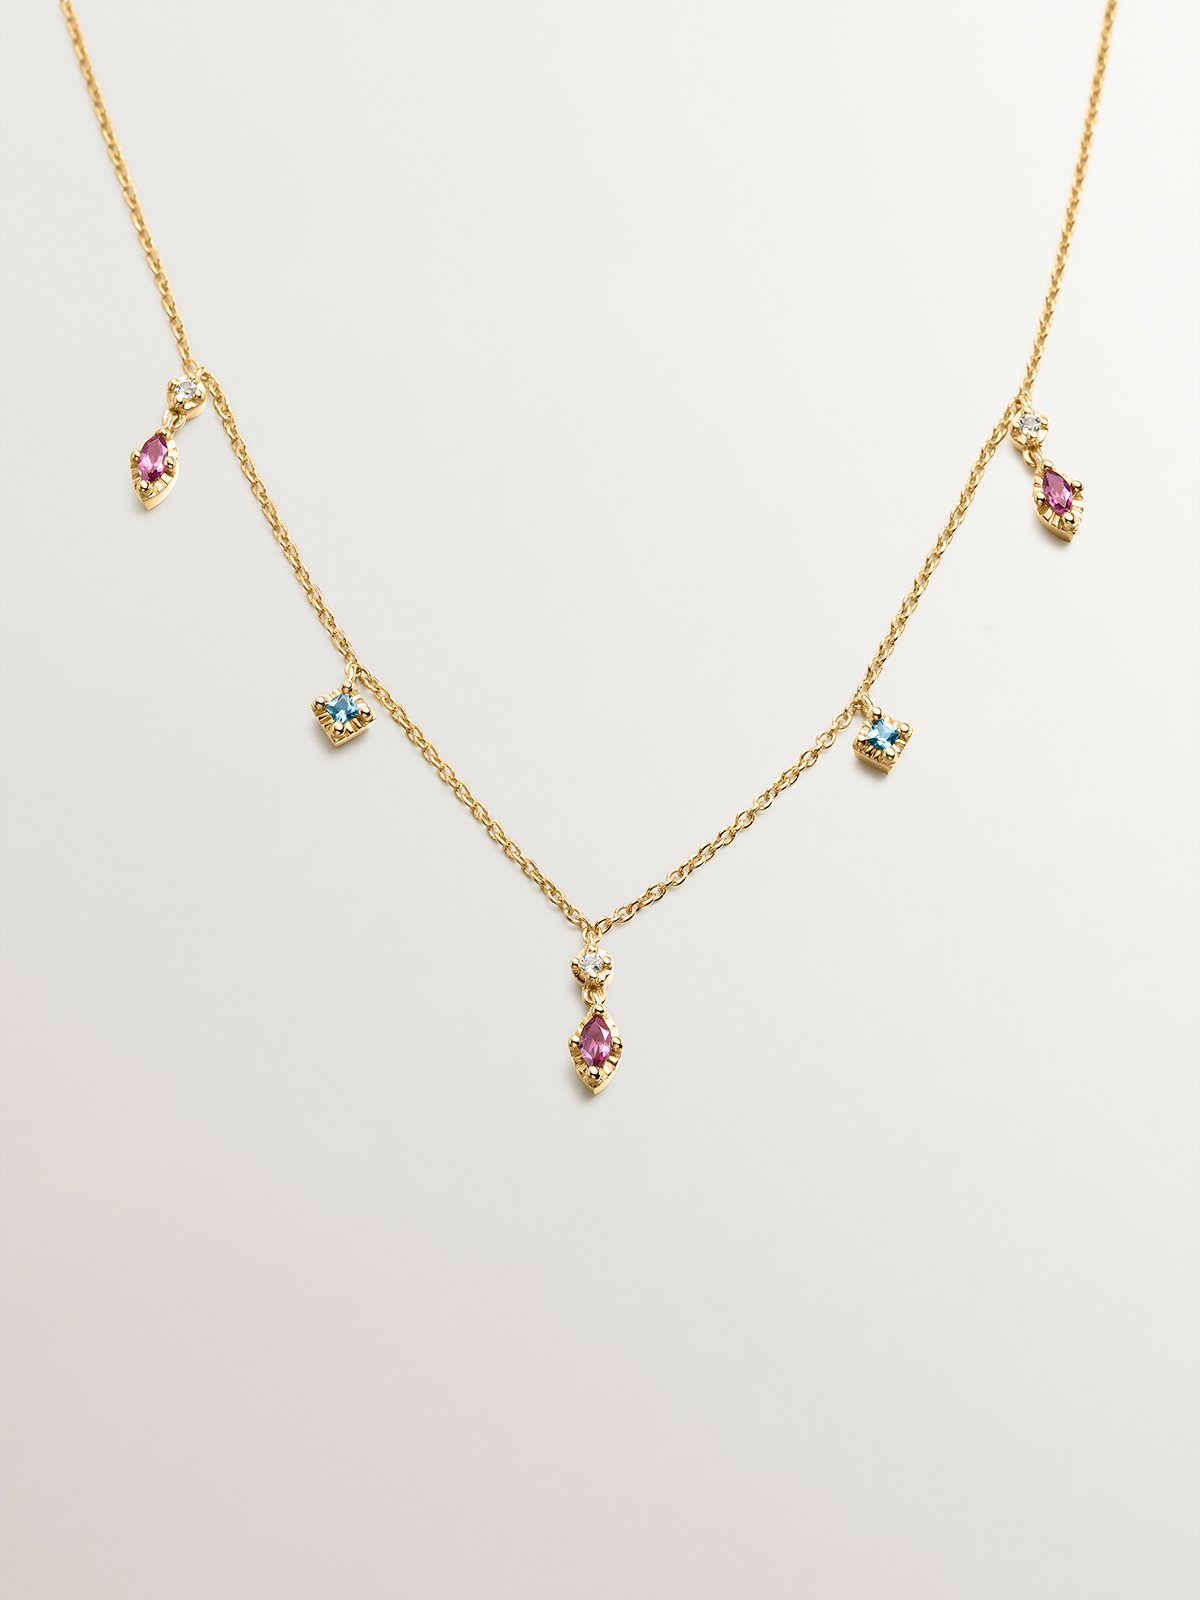 925 Silver necklace coated in 18K yellow gold with rhodolites and topazes.